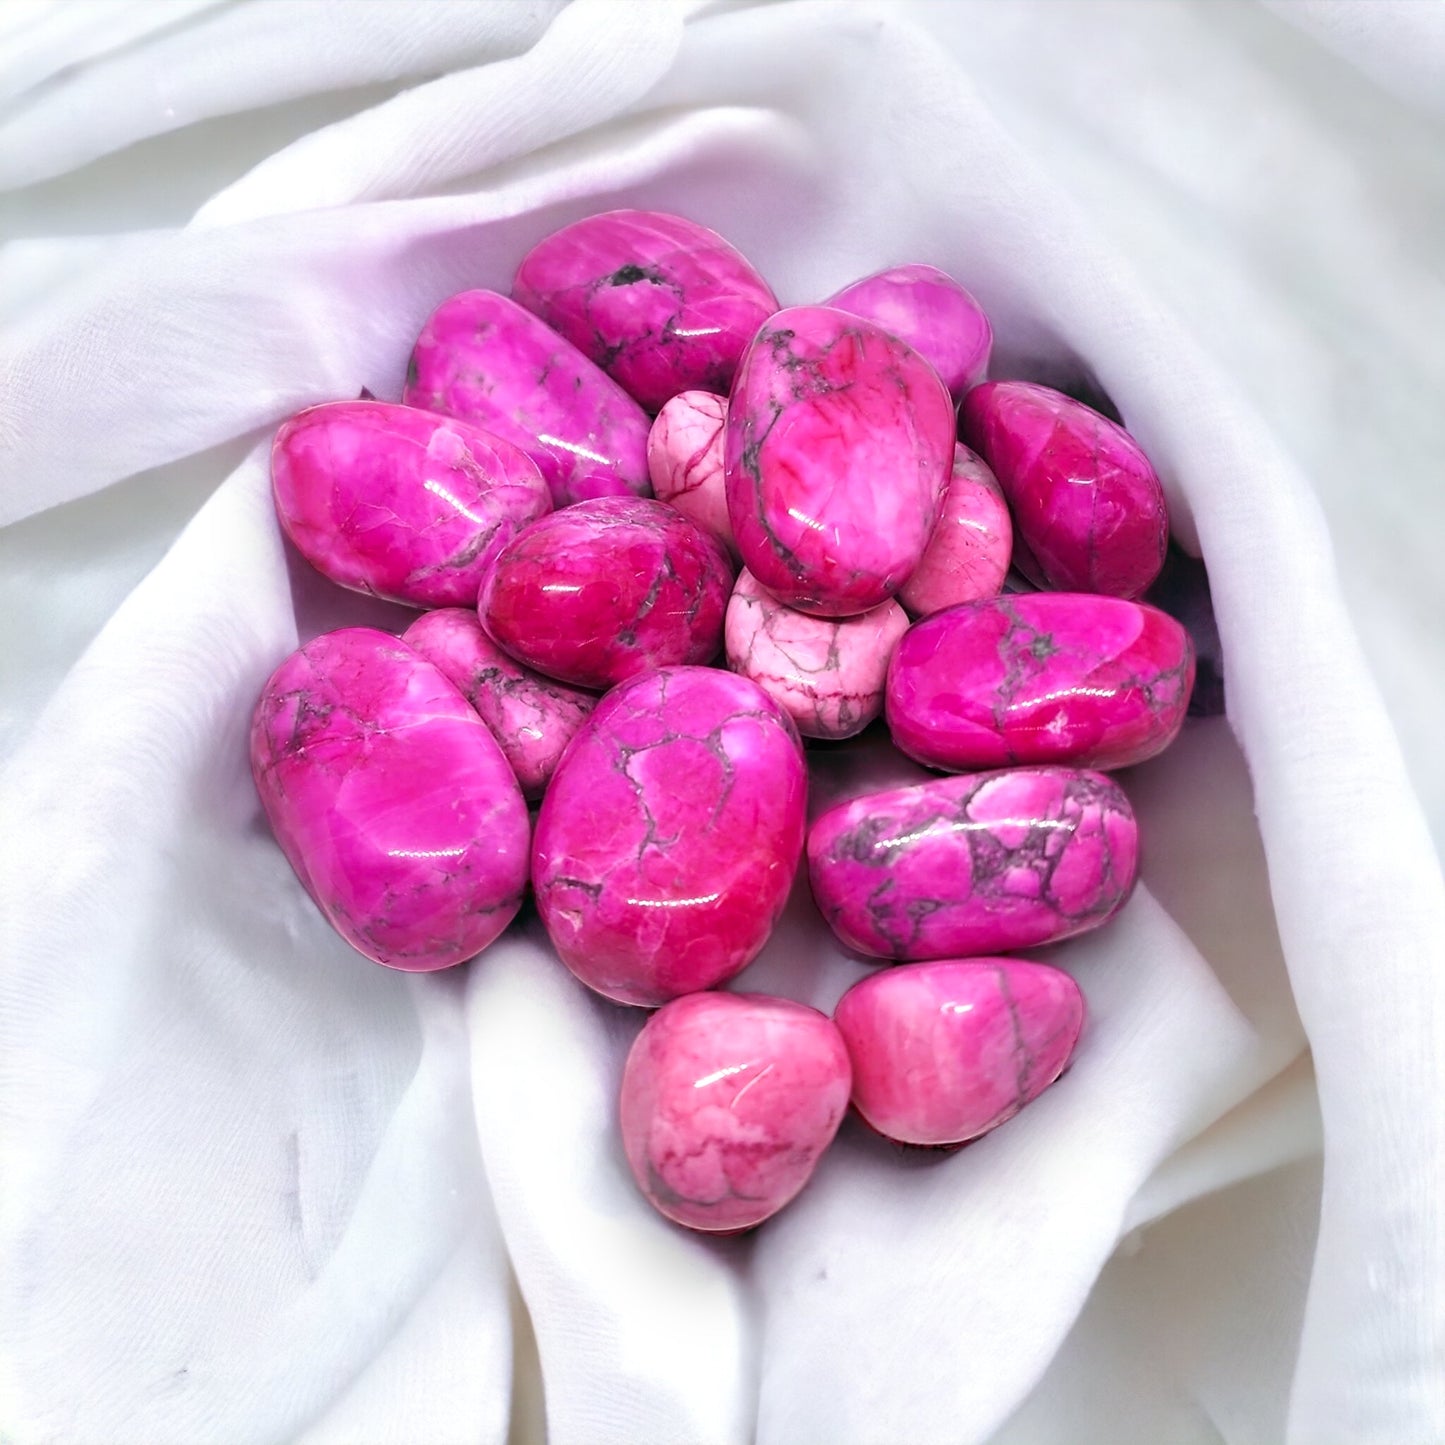 pink howlite crystal tumbles sold at mind soul sync crystal shop in Australia.